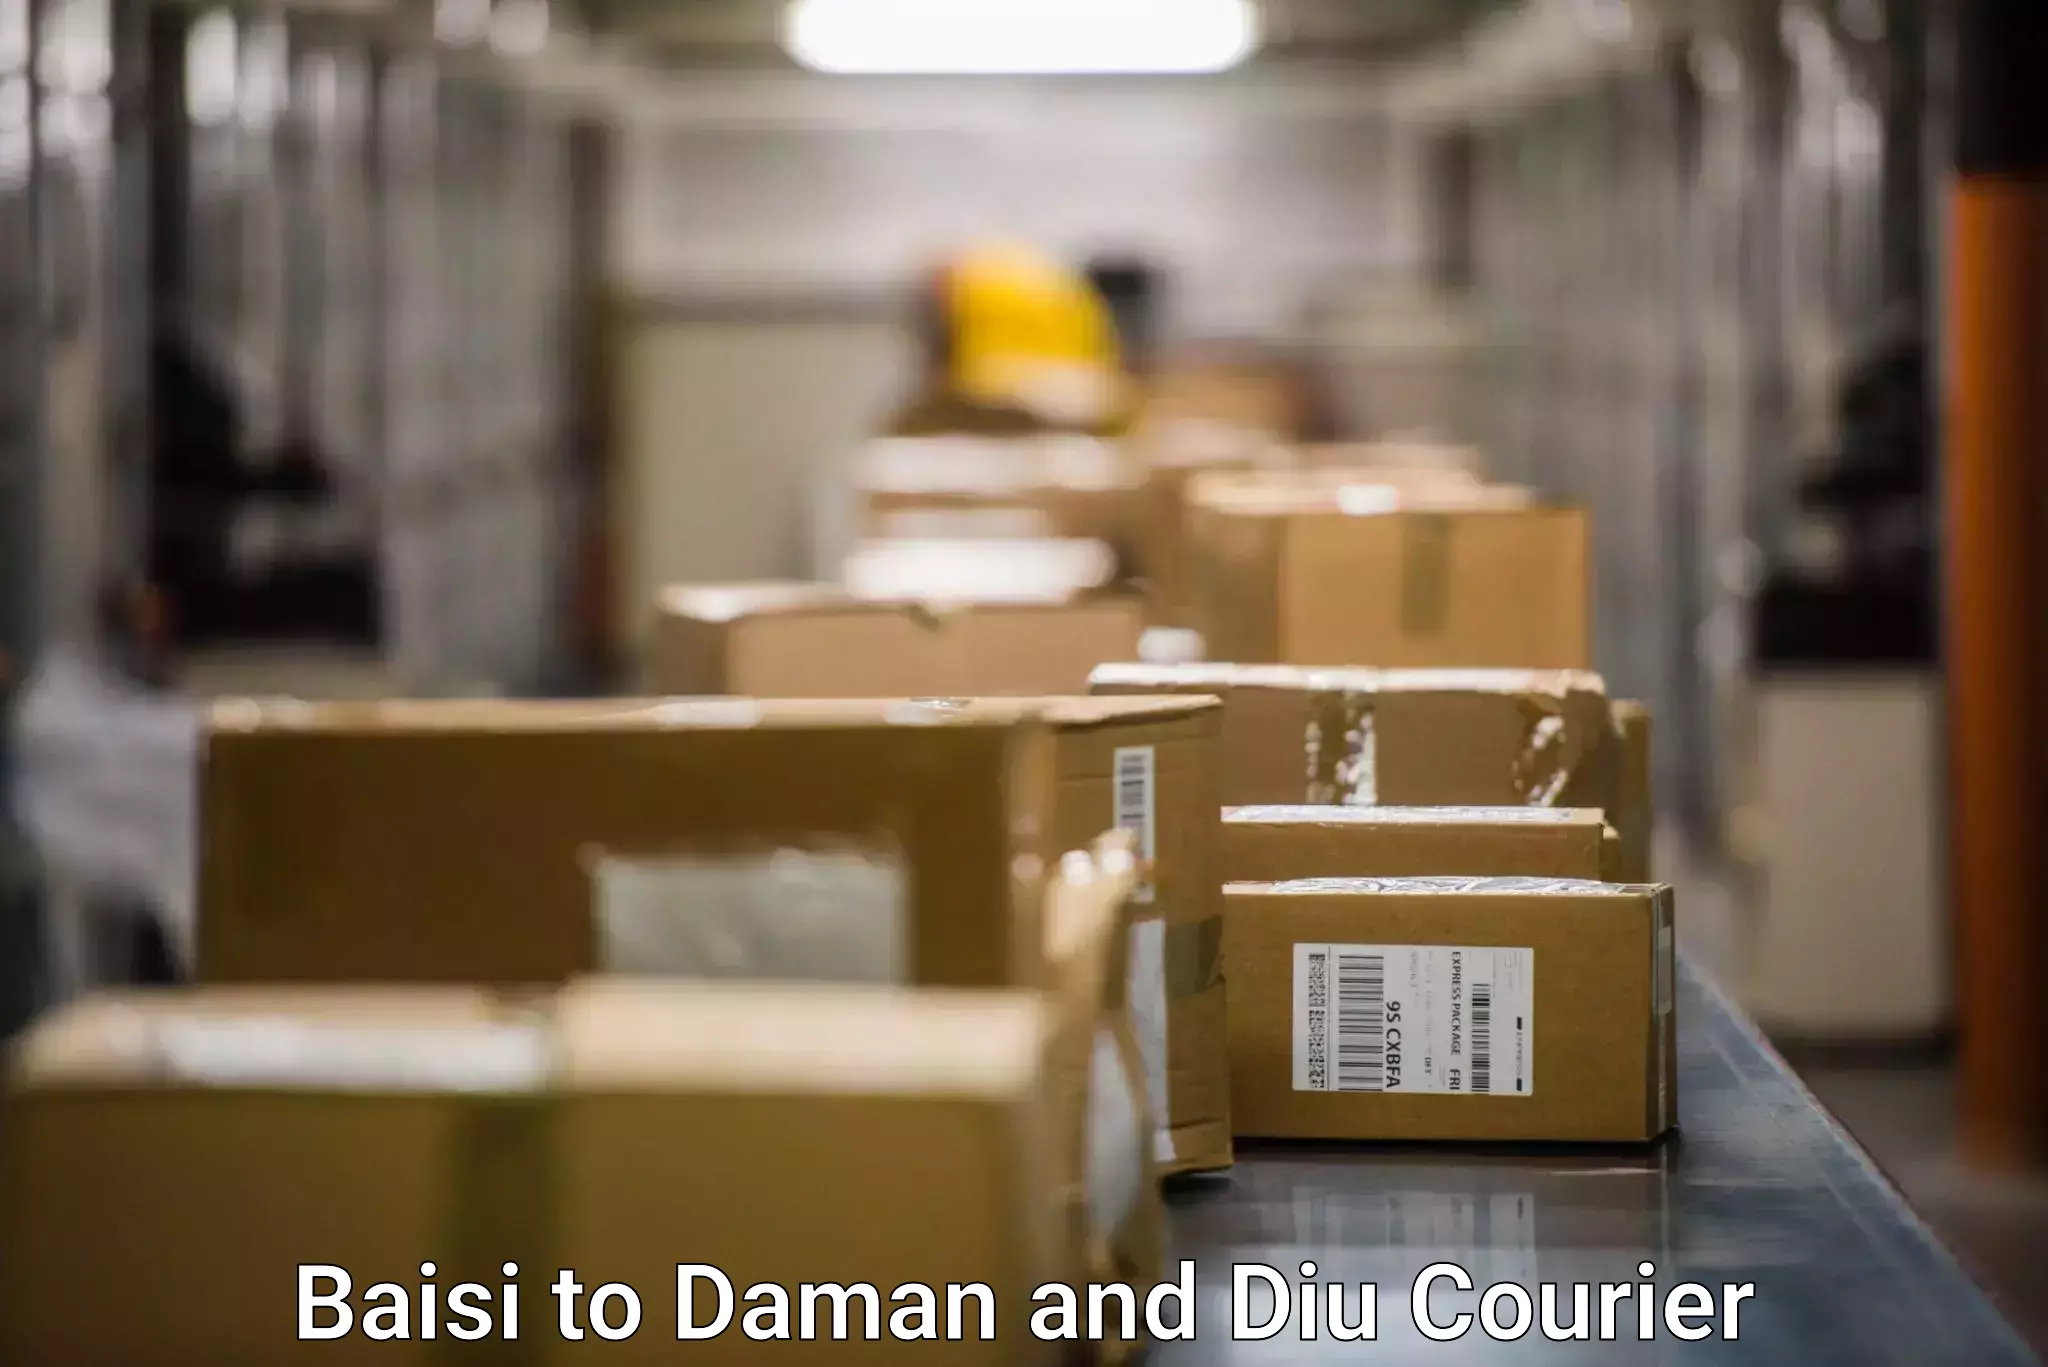 State-of-the-art courier technology Baisi to Daman